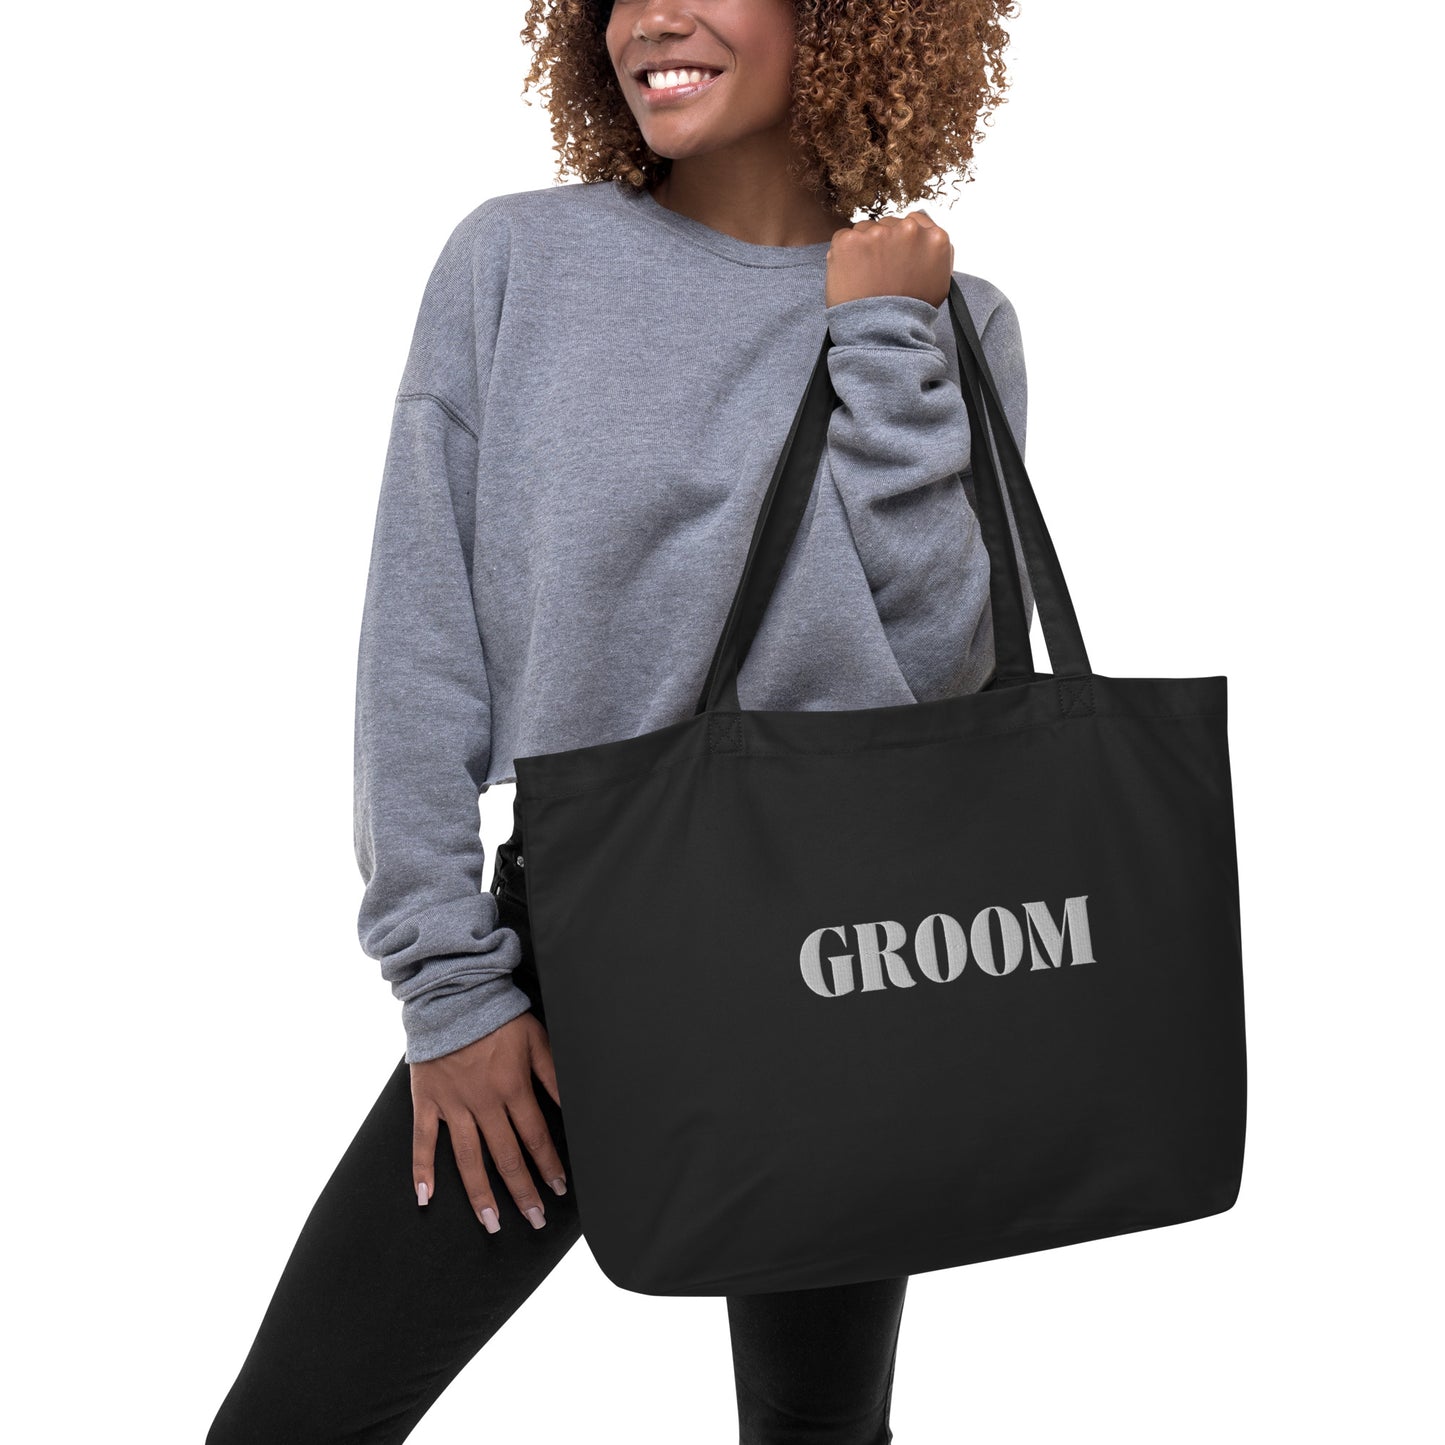 Groom Embroidered Large organic tote bag